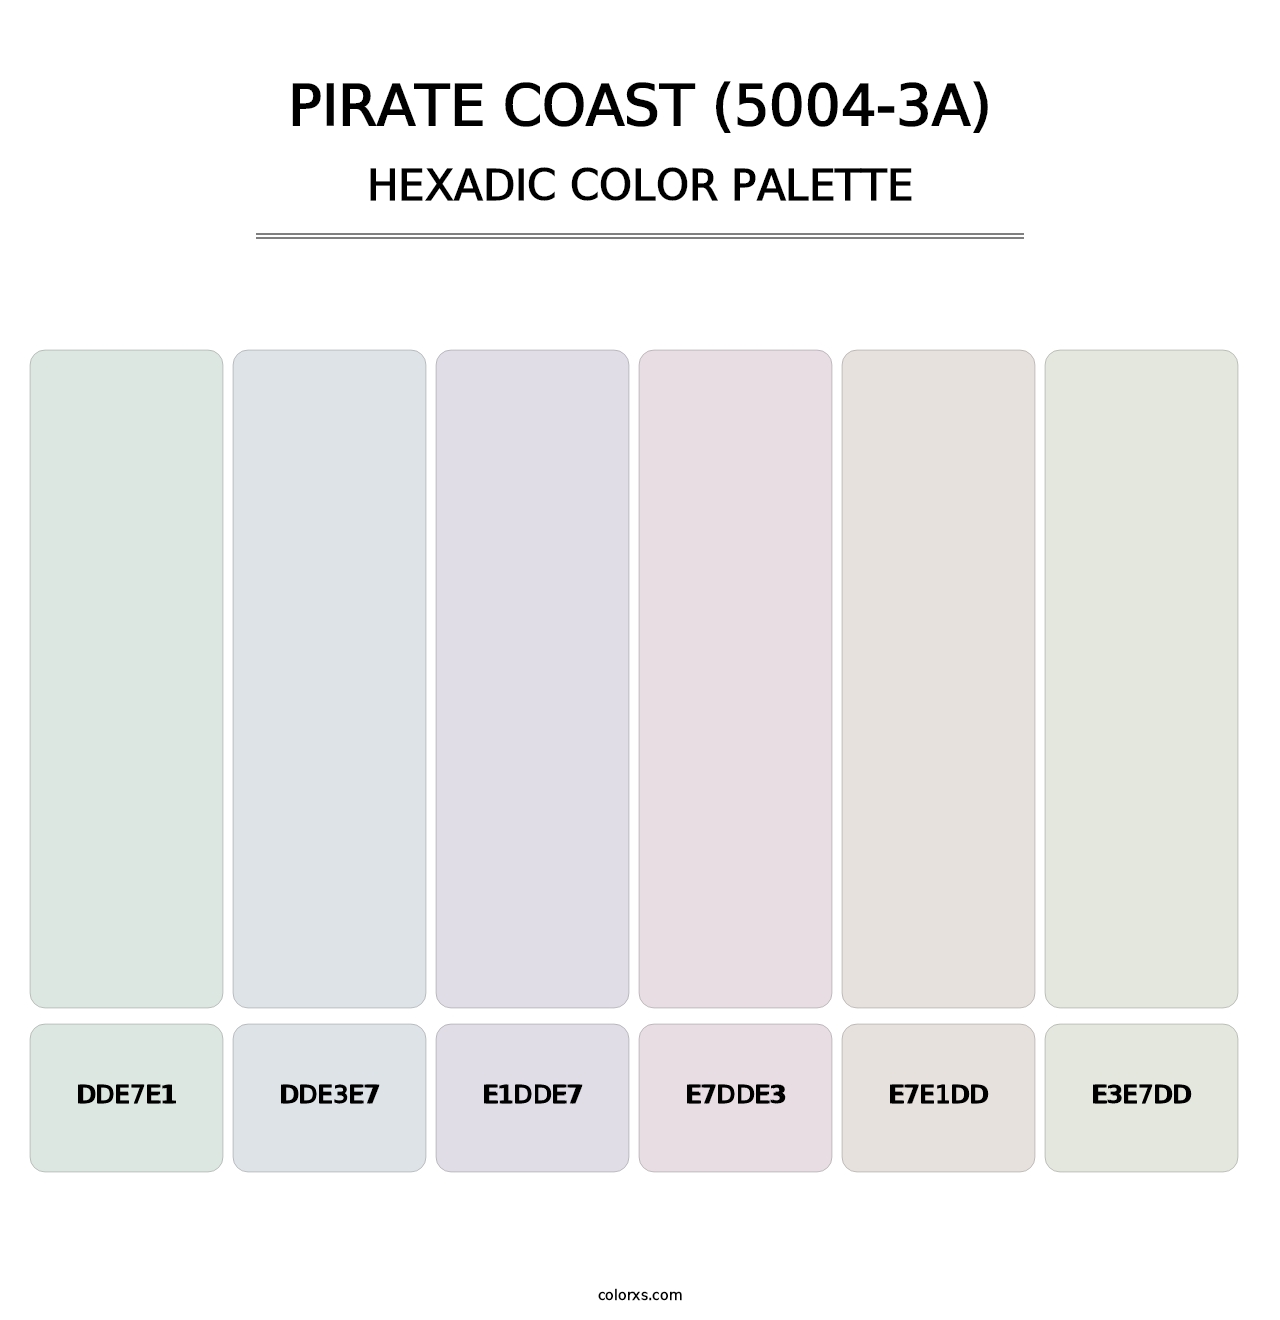 Pirate Coast (5004-3A) - Hexadic Color Palette